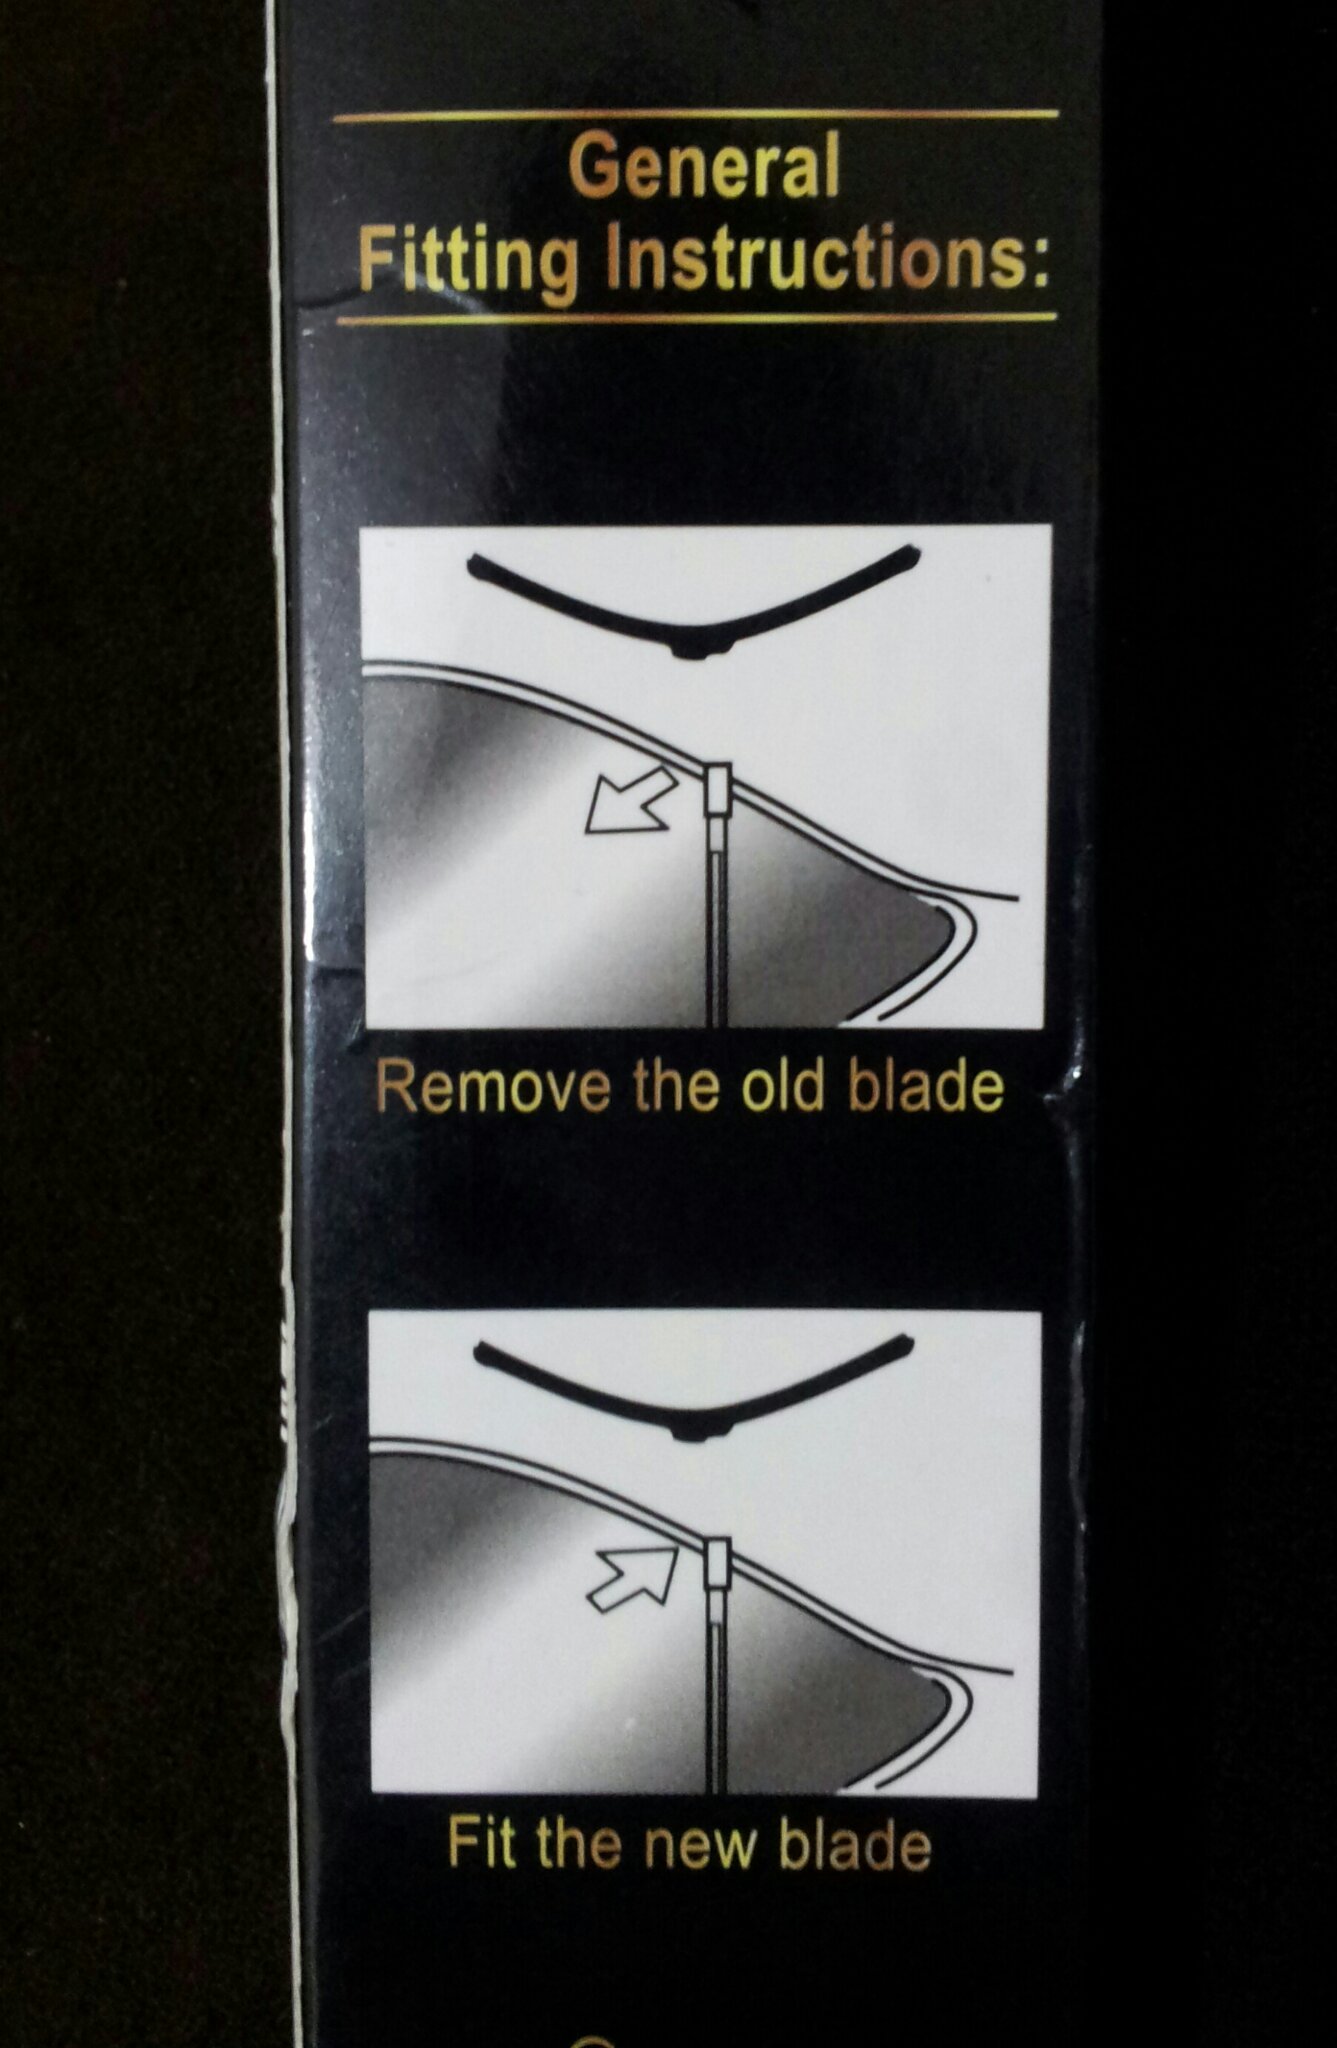 Just bought new wiper blades. Best instructions ever! - meme